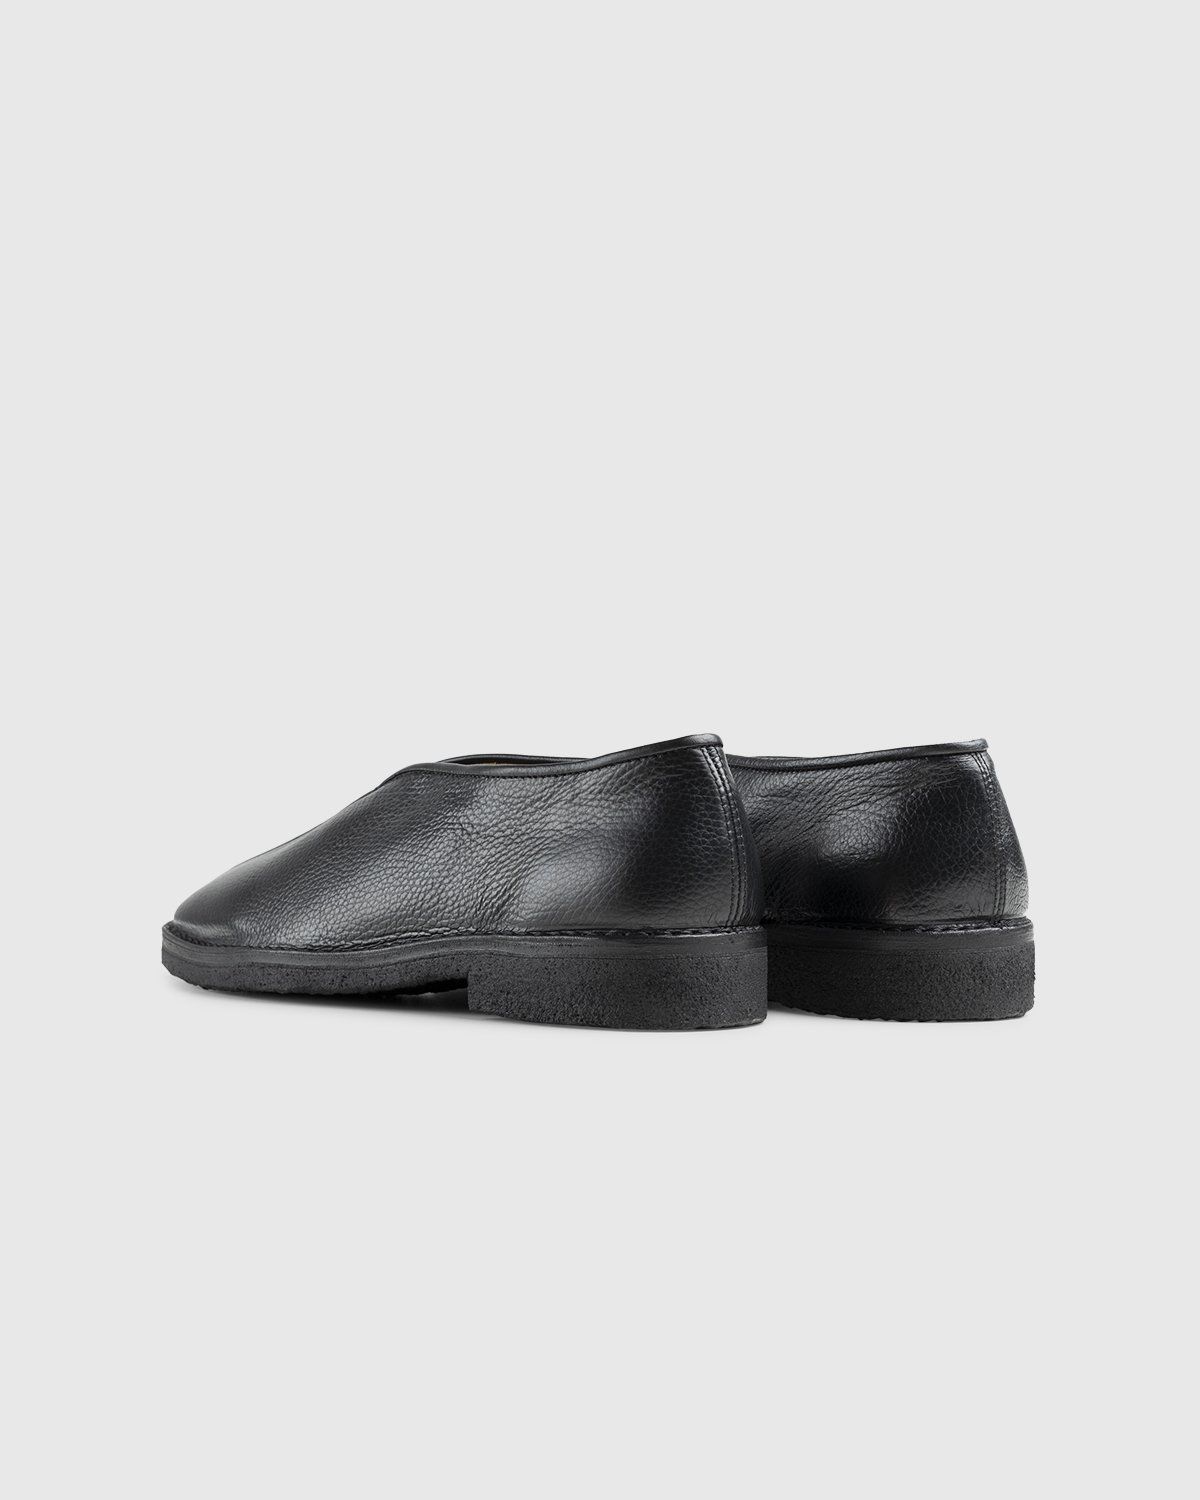 Lemaire – Leather Chinese Slippers Black - Slip-Ons - Black - Image 5